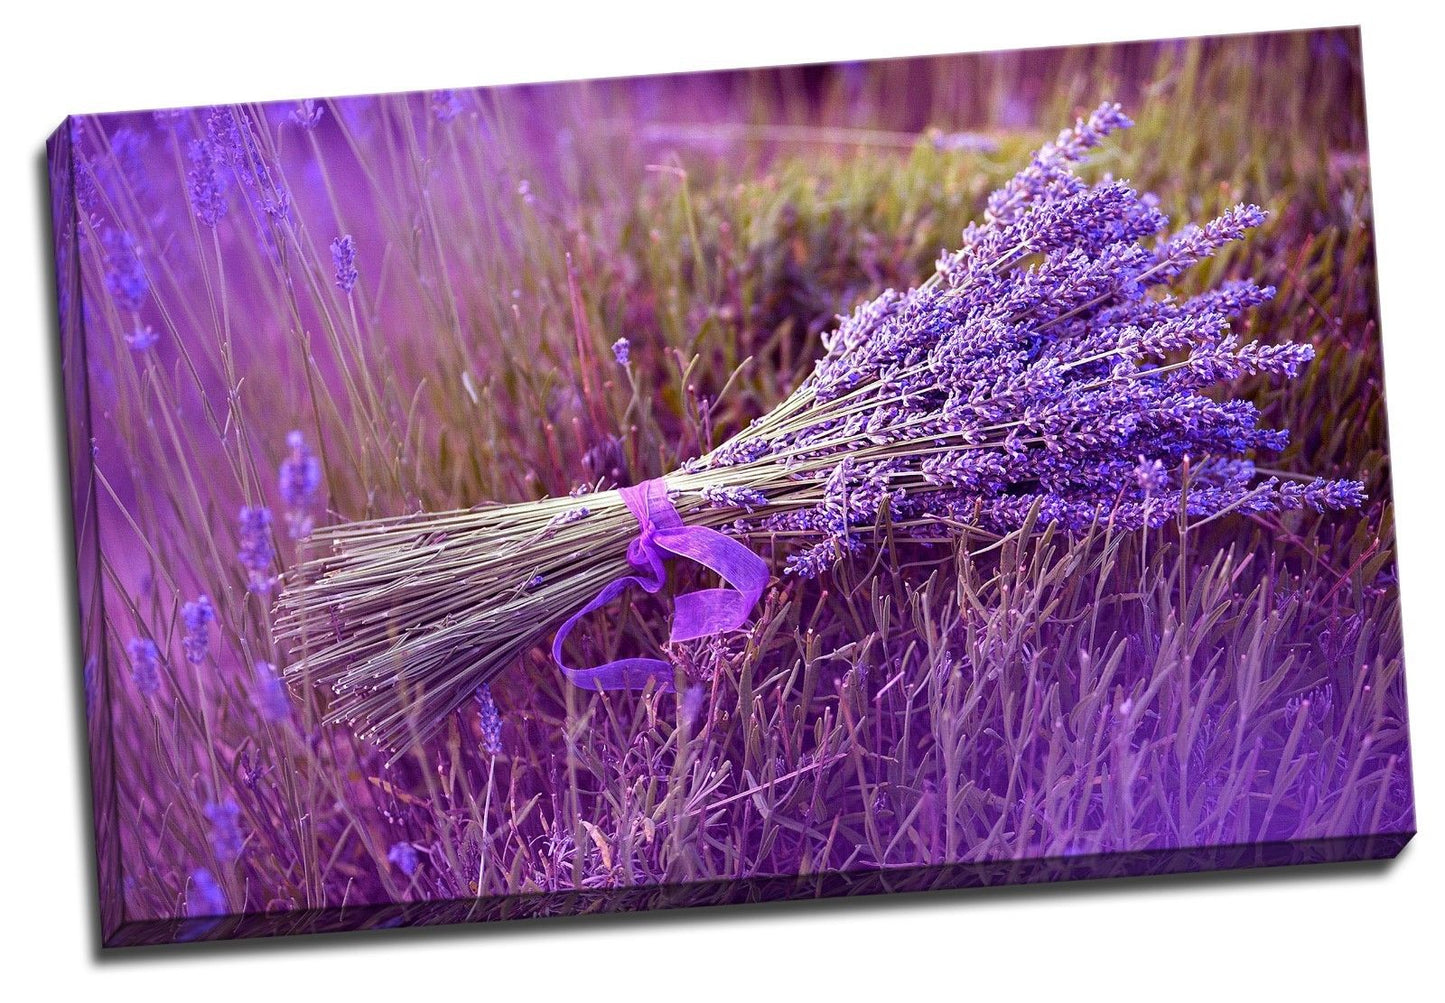 Lavender Bunch Stretched Canvas Prints Framed Wall Art Home Decor Painting Gift